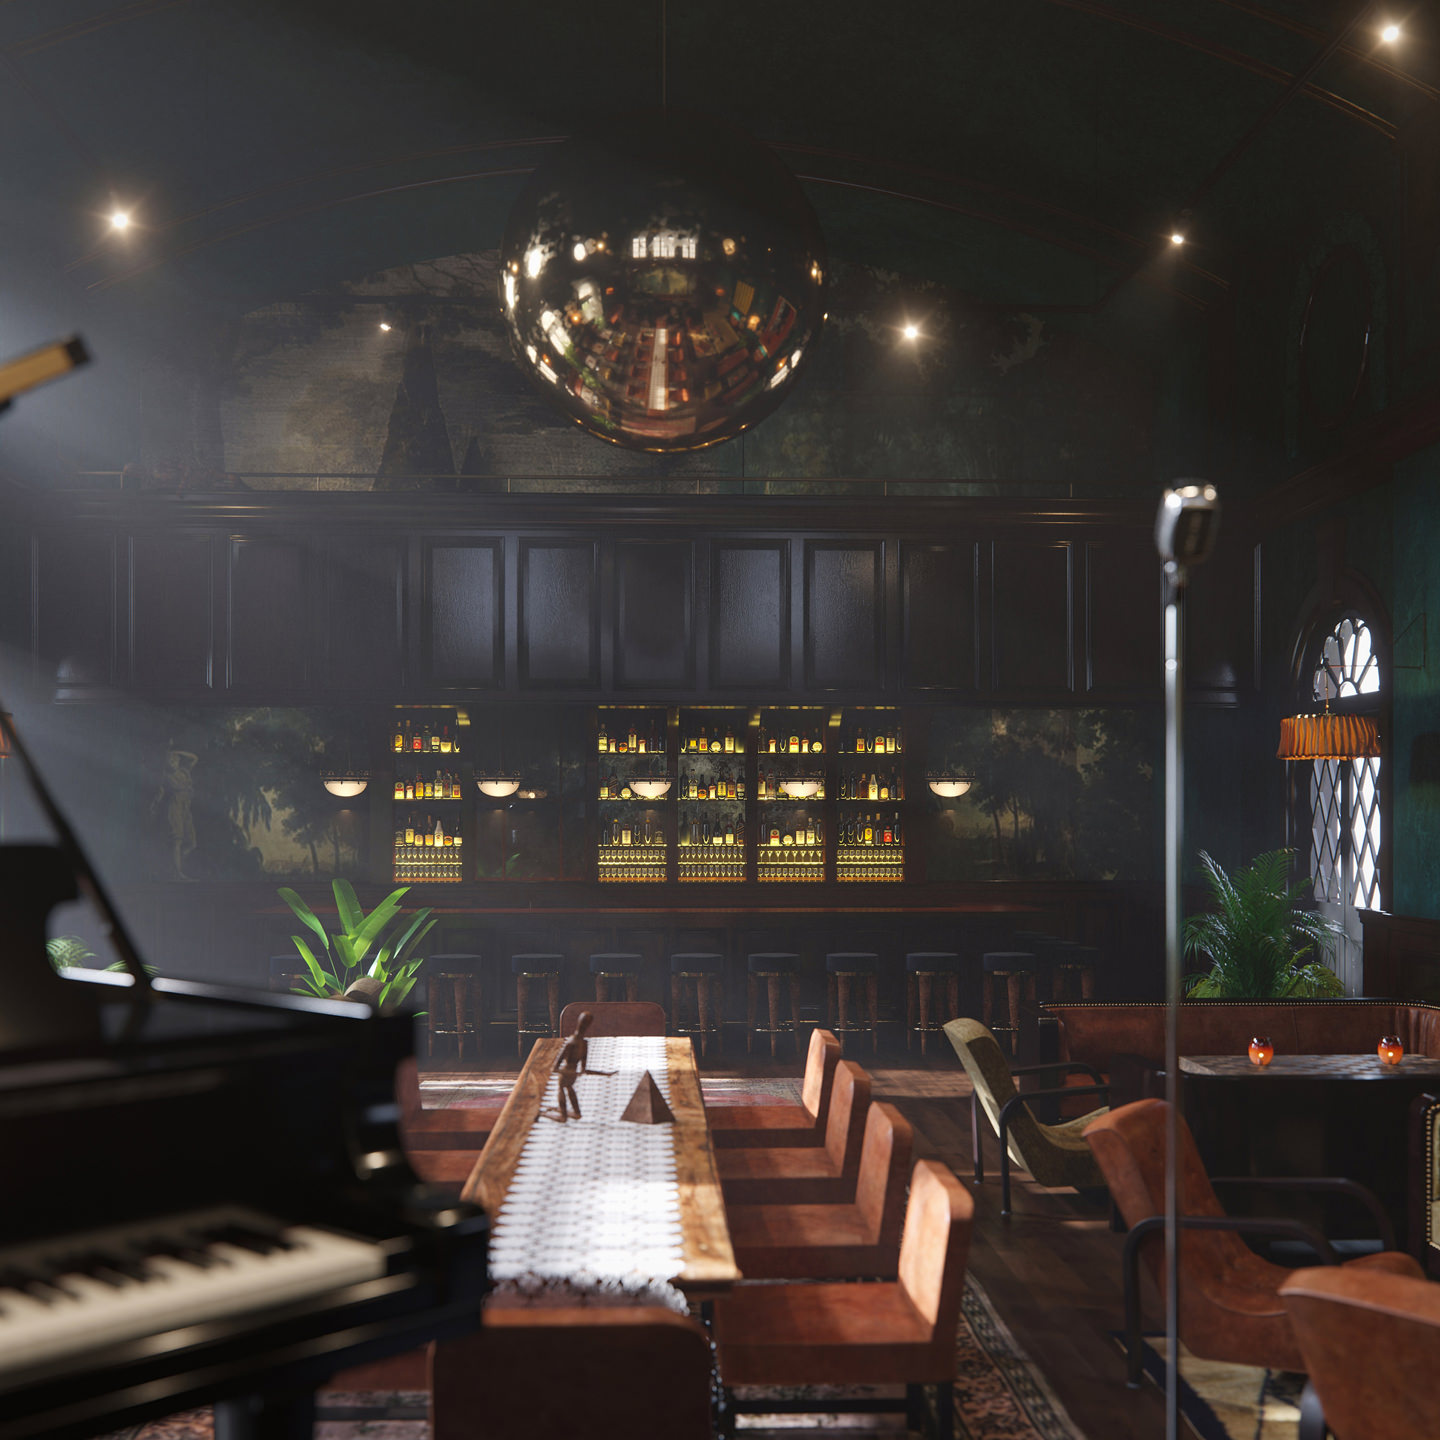 View of the lounge zone captured from the stage with a vintage microphone and a grand piano in the fireground